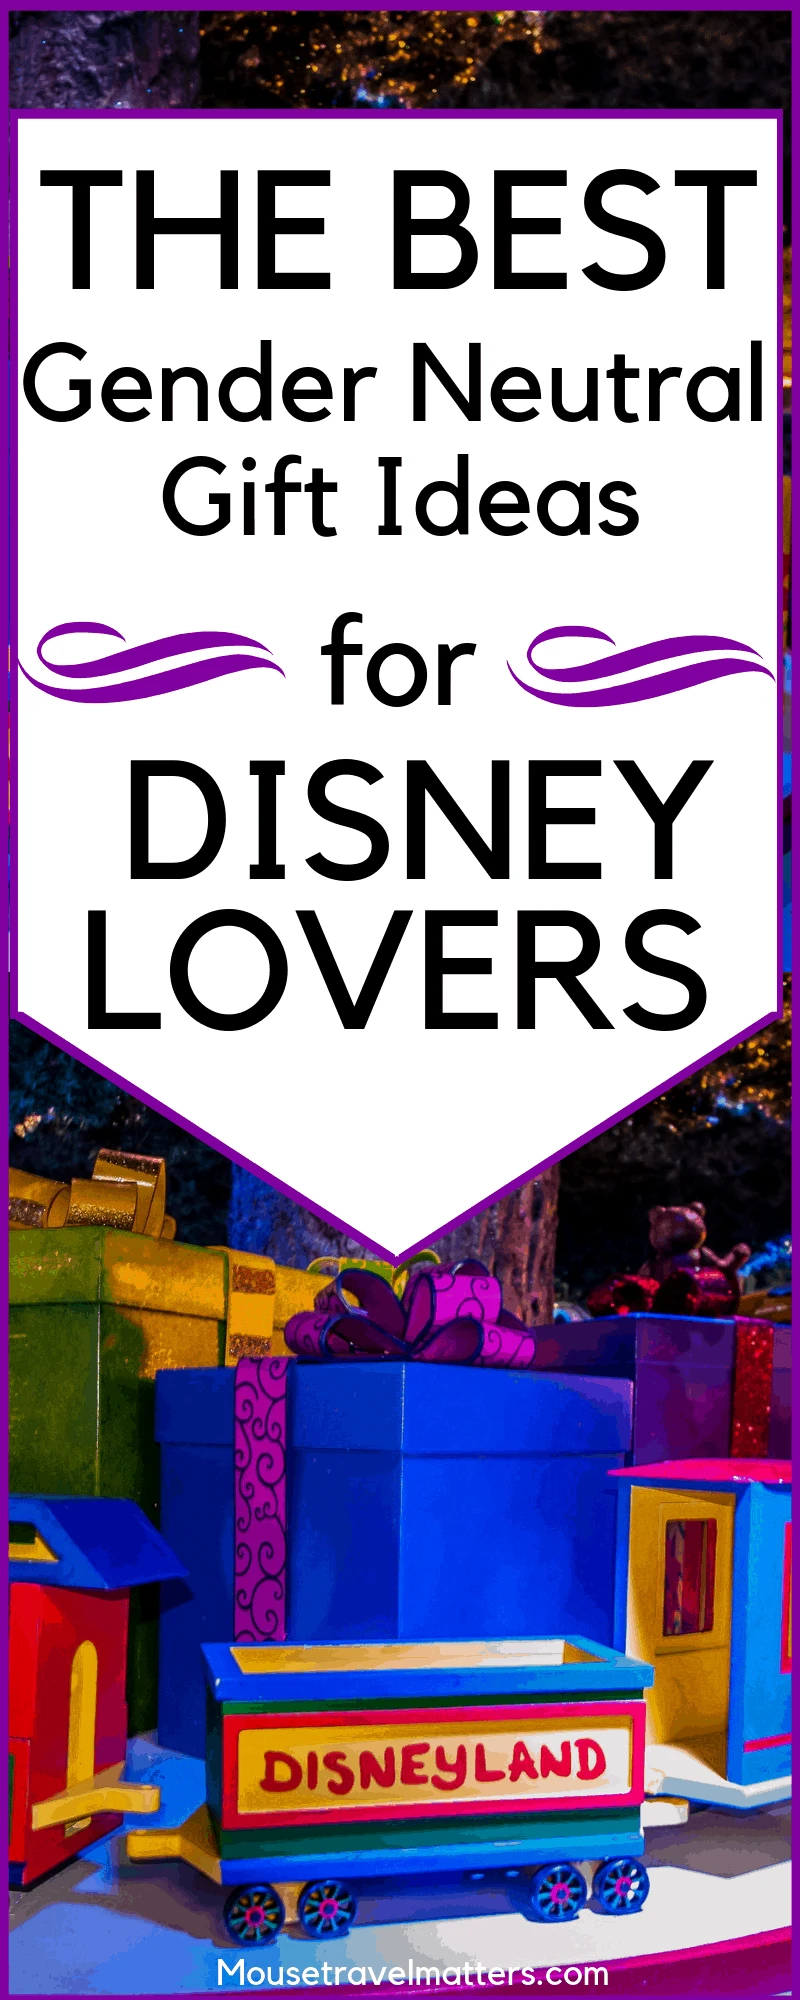 Looking for gift ideas for toddler boys and girls? Here's a Gender-neutral Disney gift guide and full of great learning toys and activities!